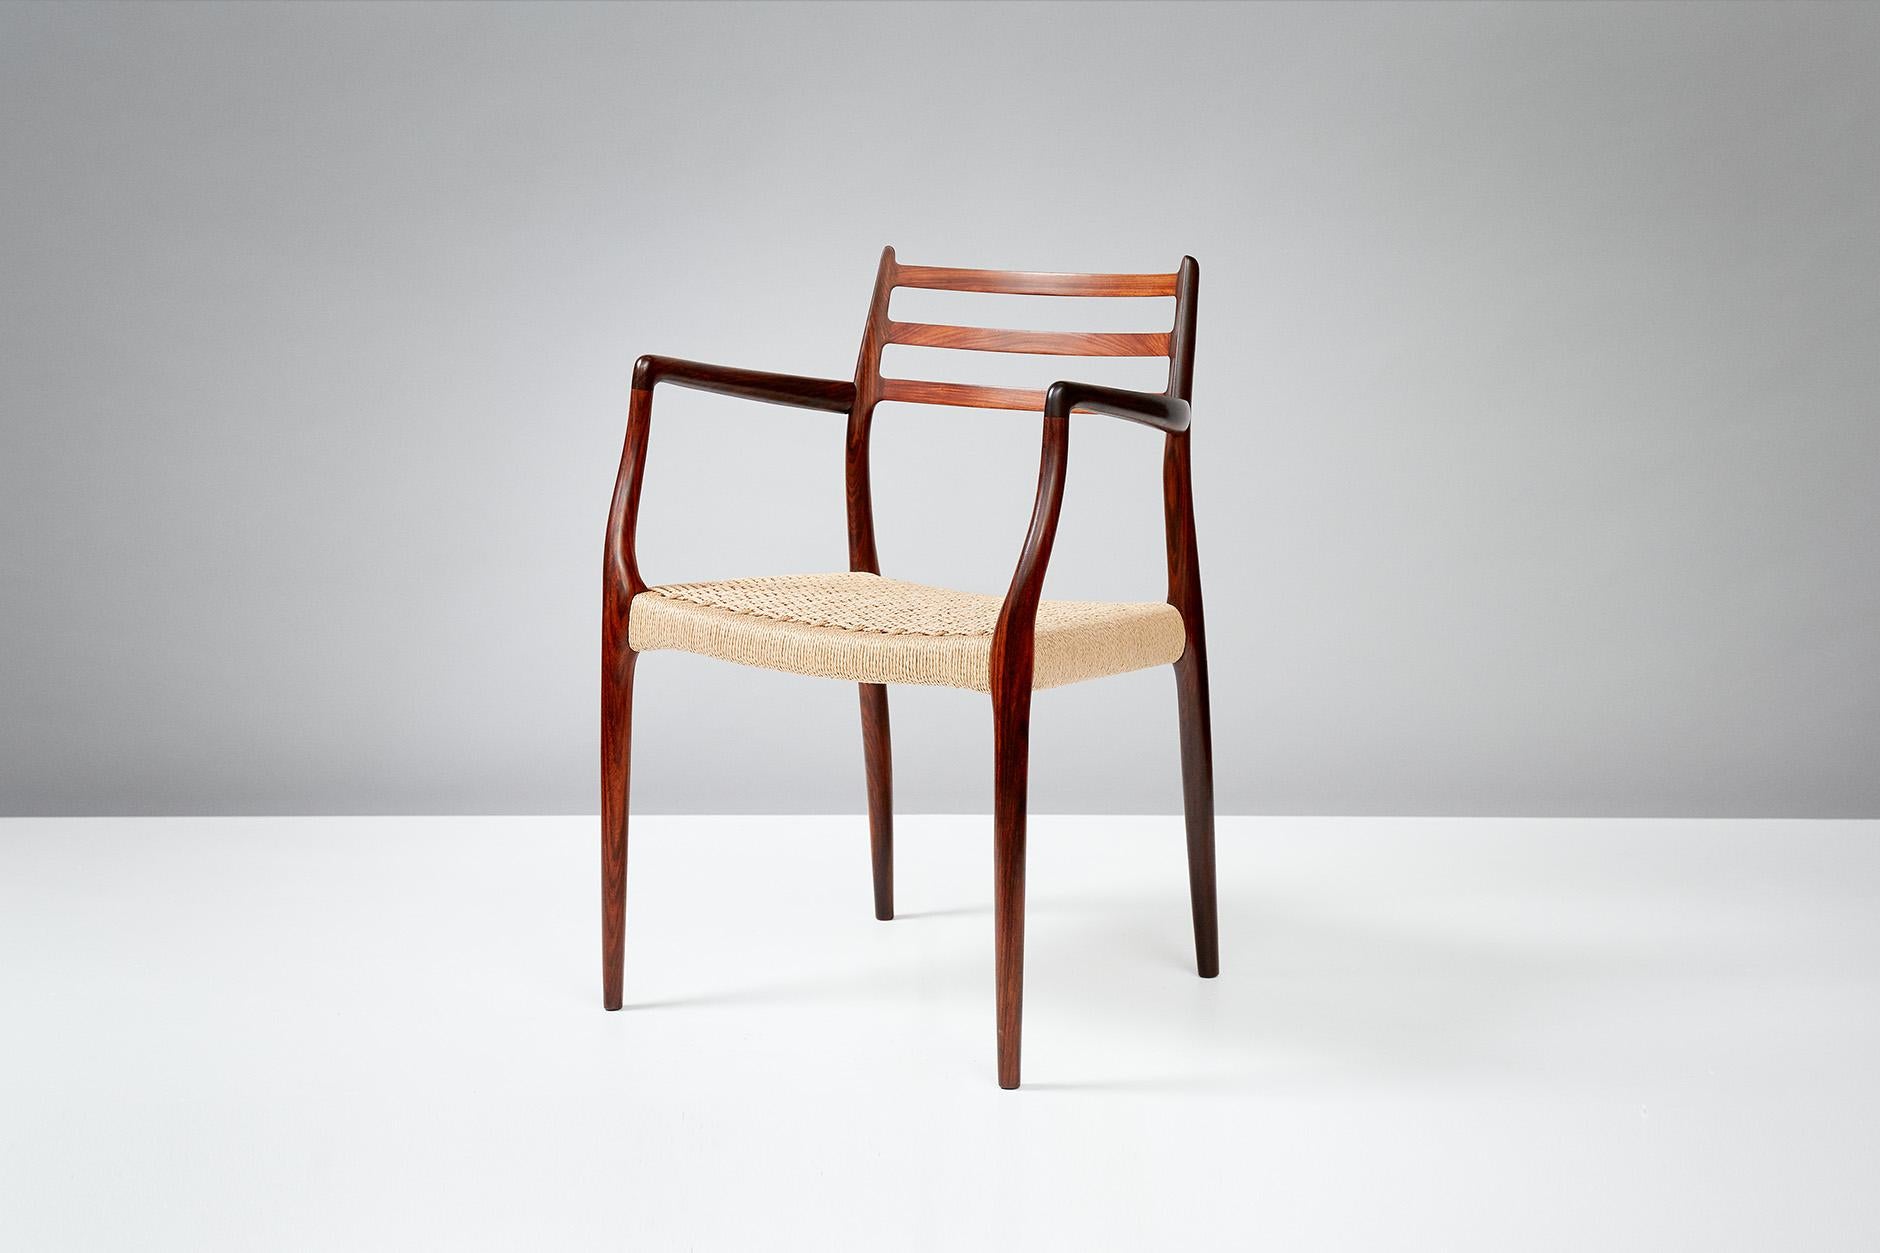 Niels Moller

Model 62 Armchair & Model 78 Side Chair Set, 1962

Chairs designed by Niels Moller for J.L. Moller Mobelfabrik, Denmark, 1962 with newly woven papercord seats. 